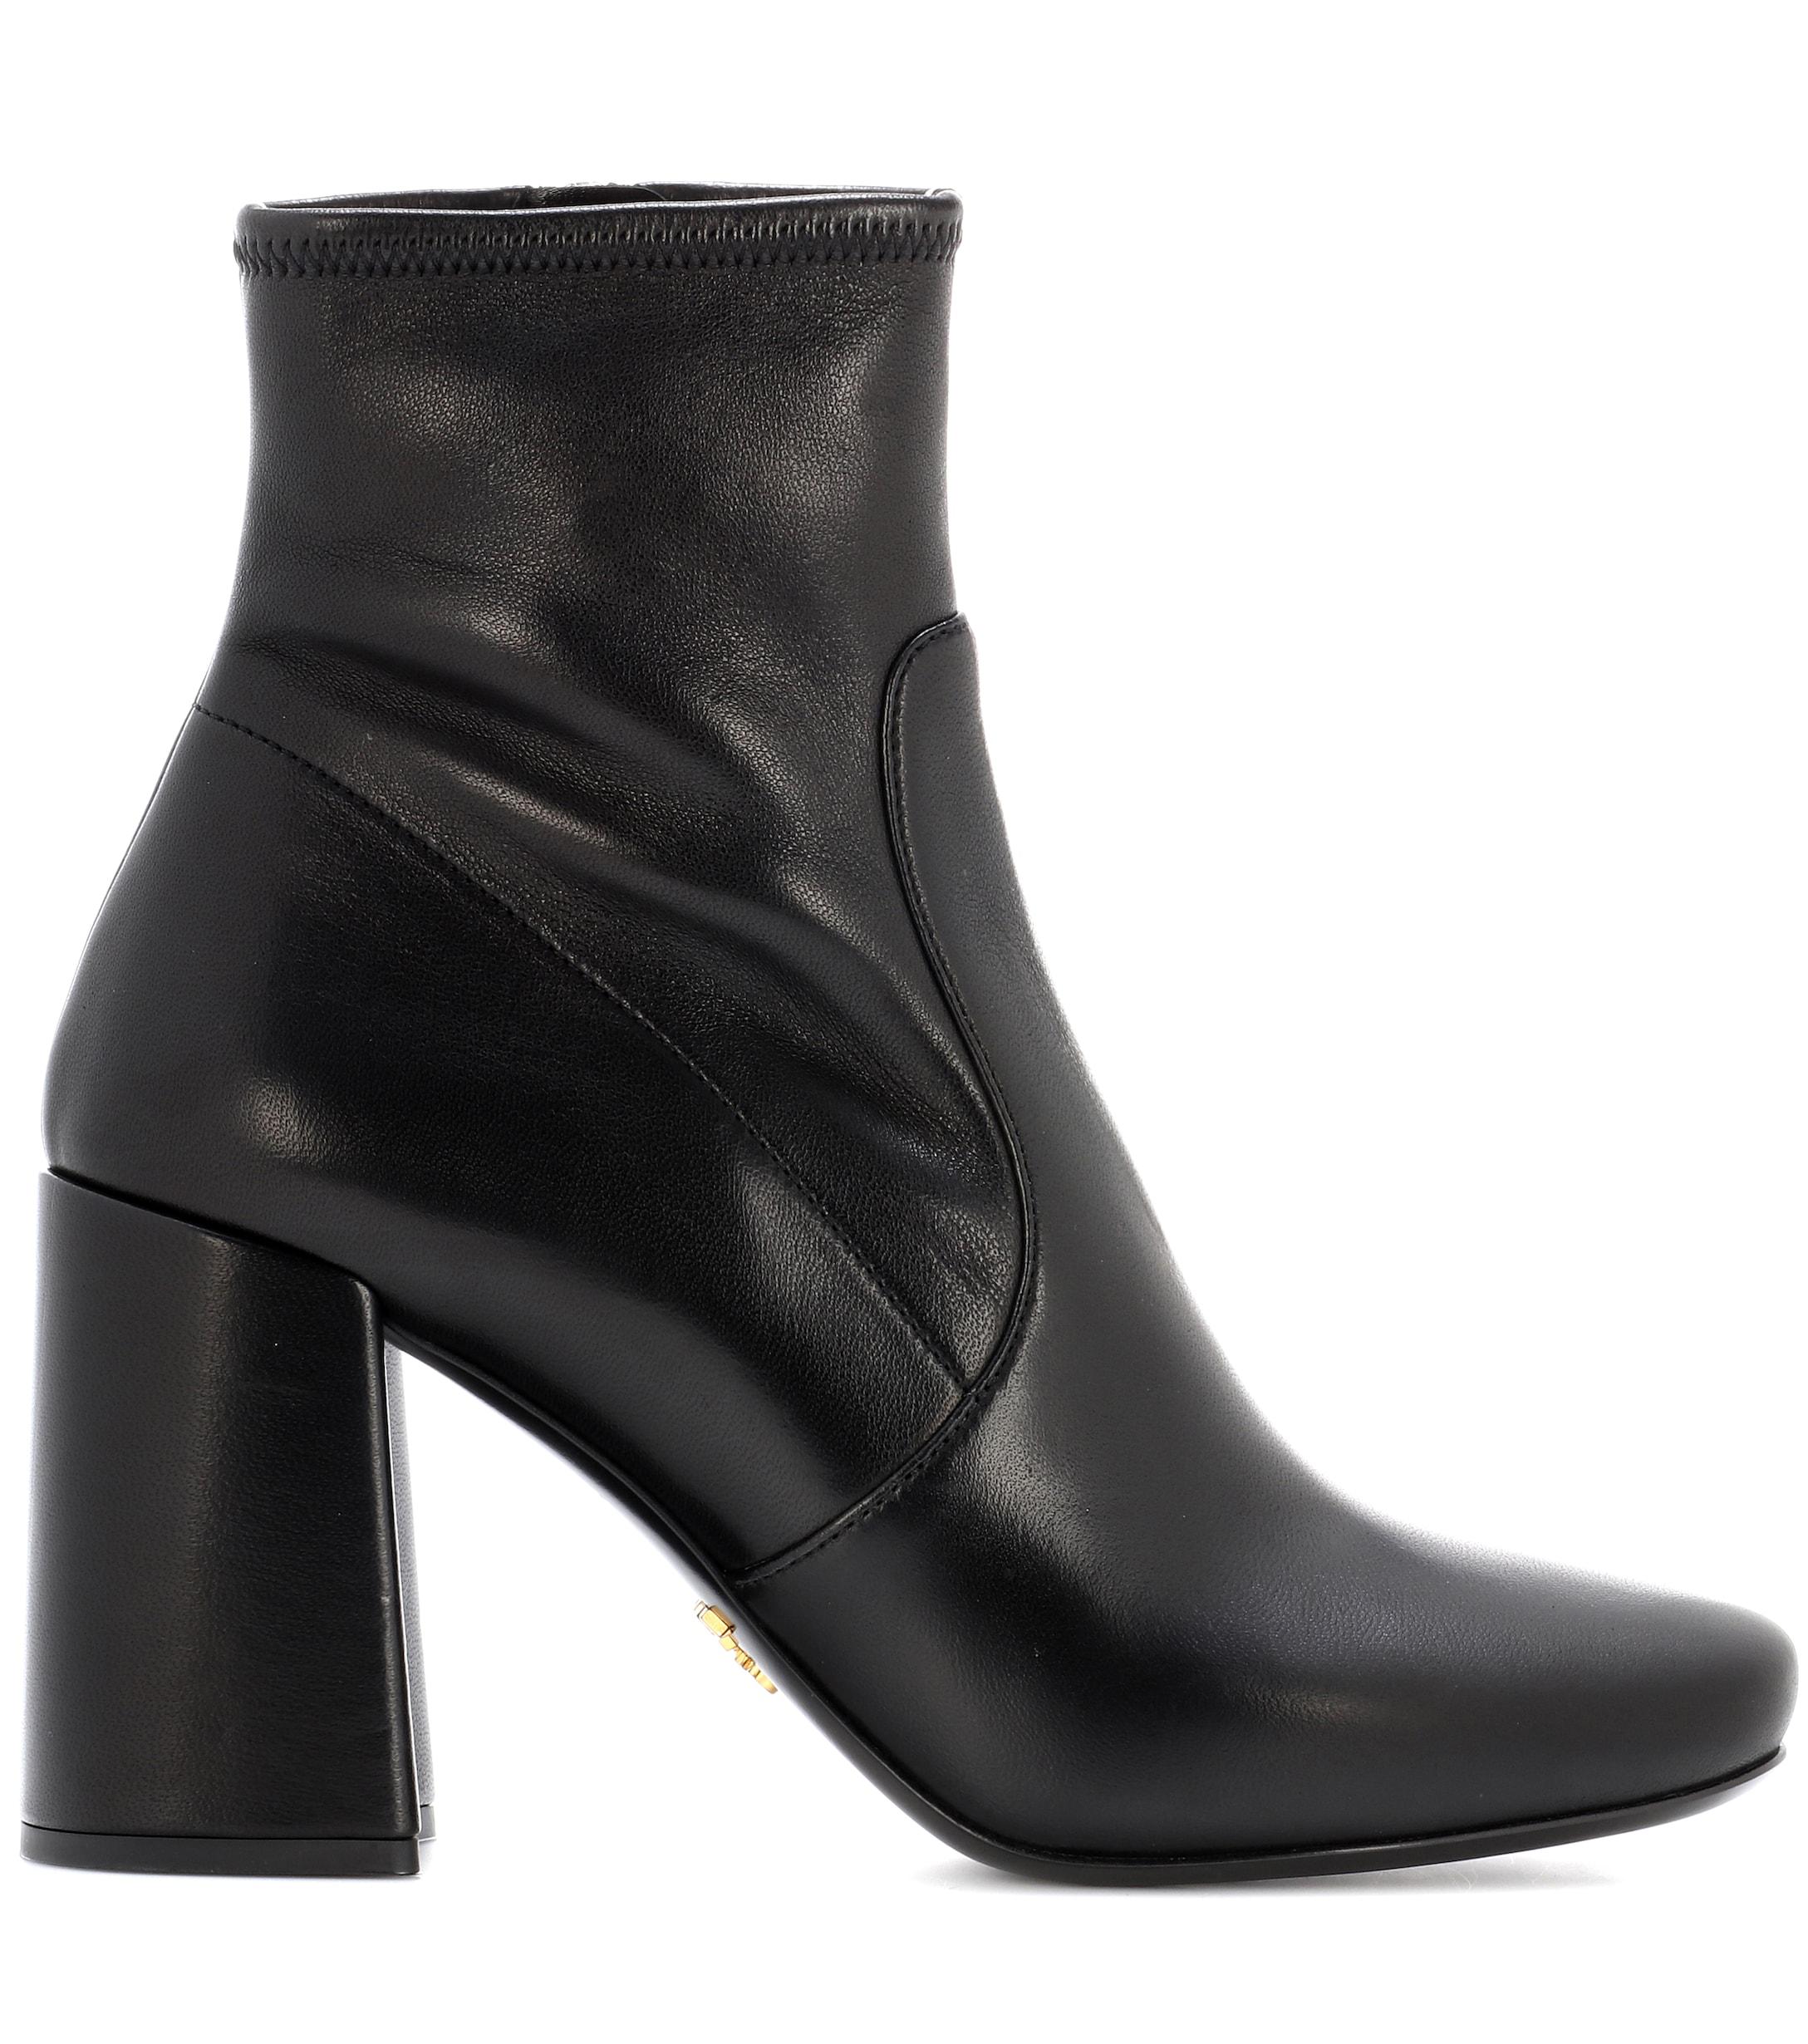 Prada Leather Ankle Boots in Nero (Black) - Lyst